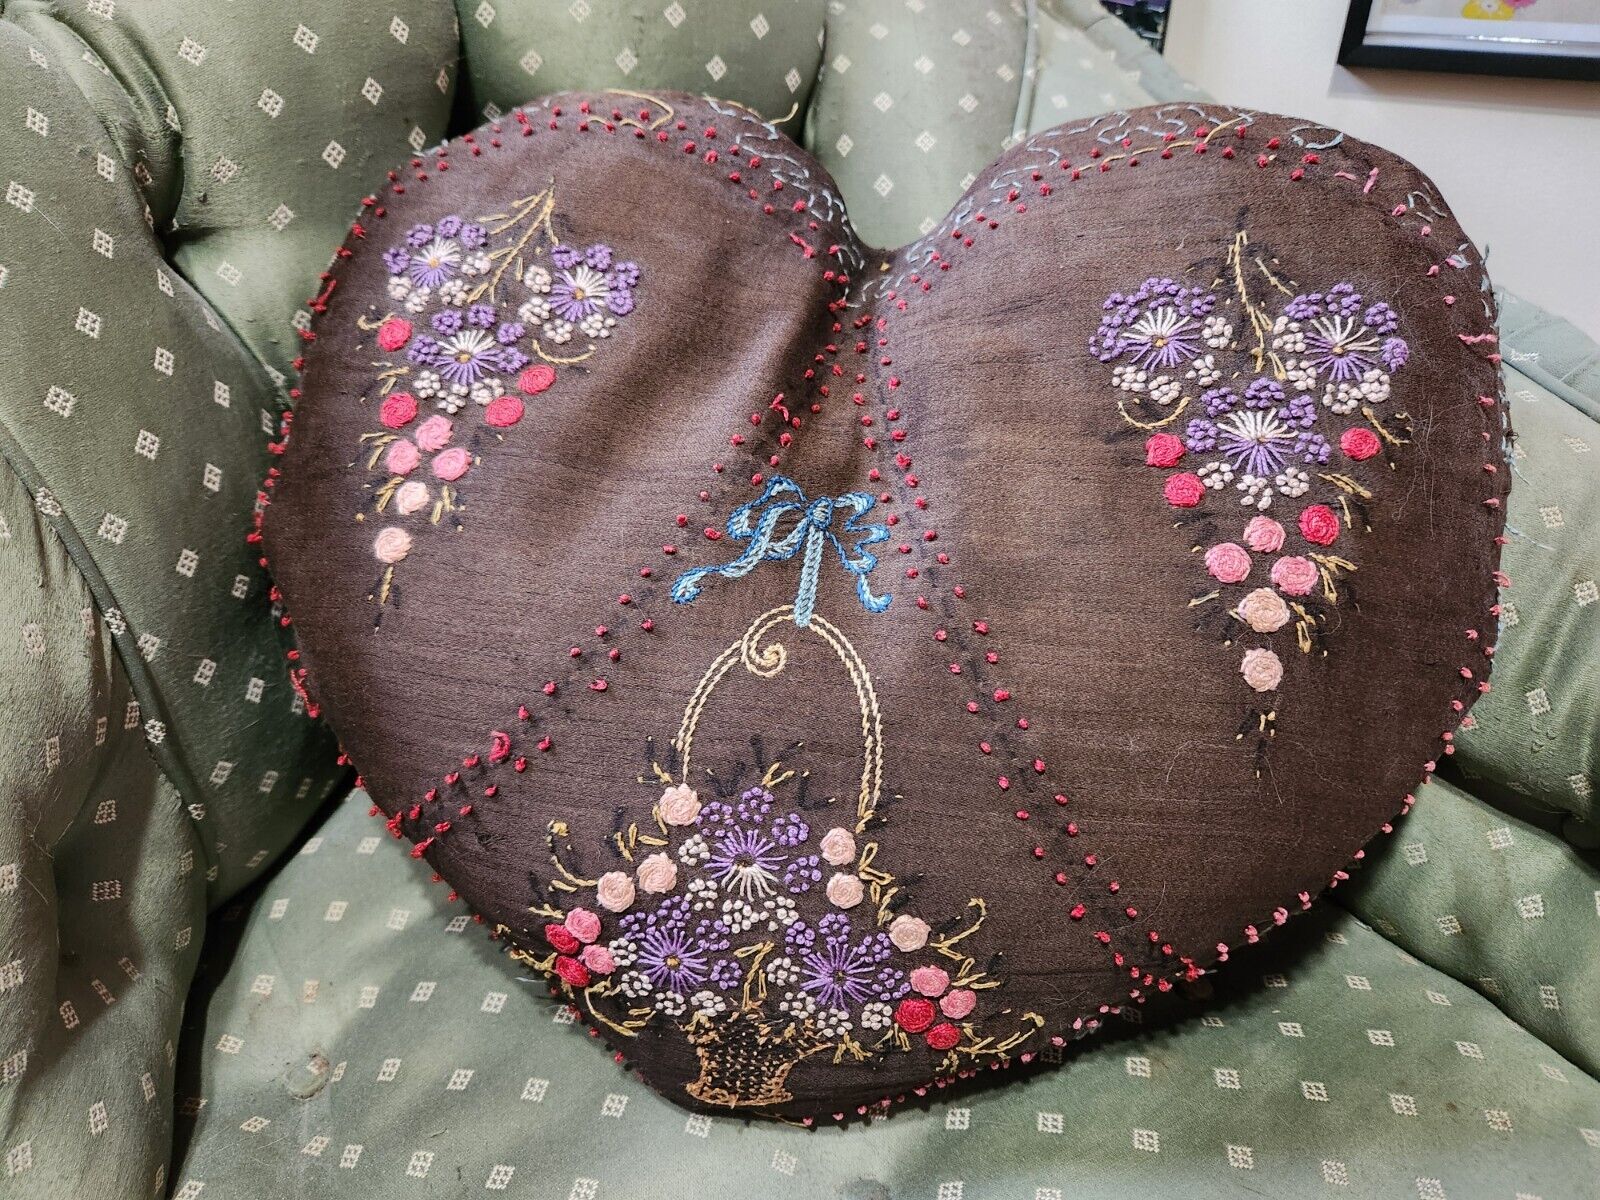 Vintage Embroidery Heart Pillow Antique Embroidery Heart Pillow 18x15 inches